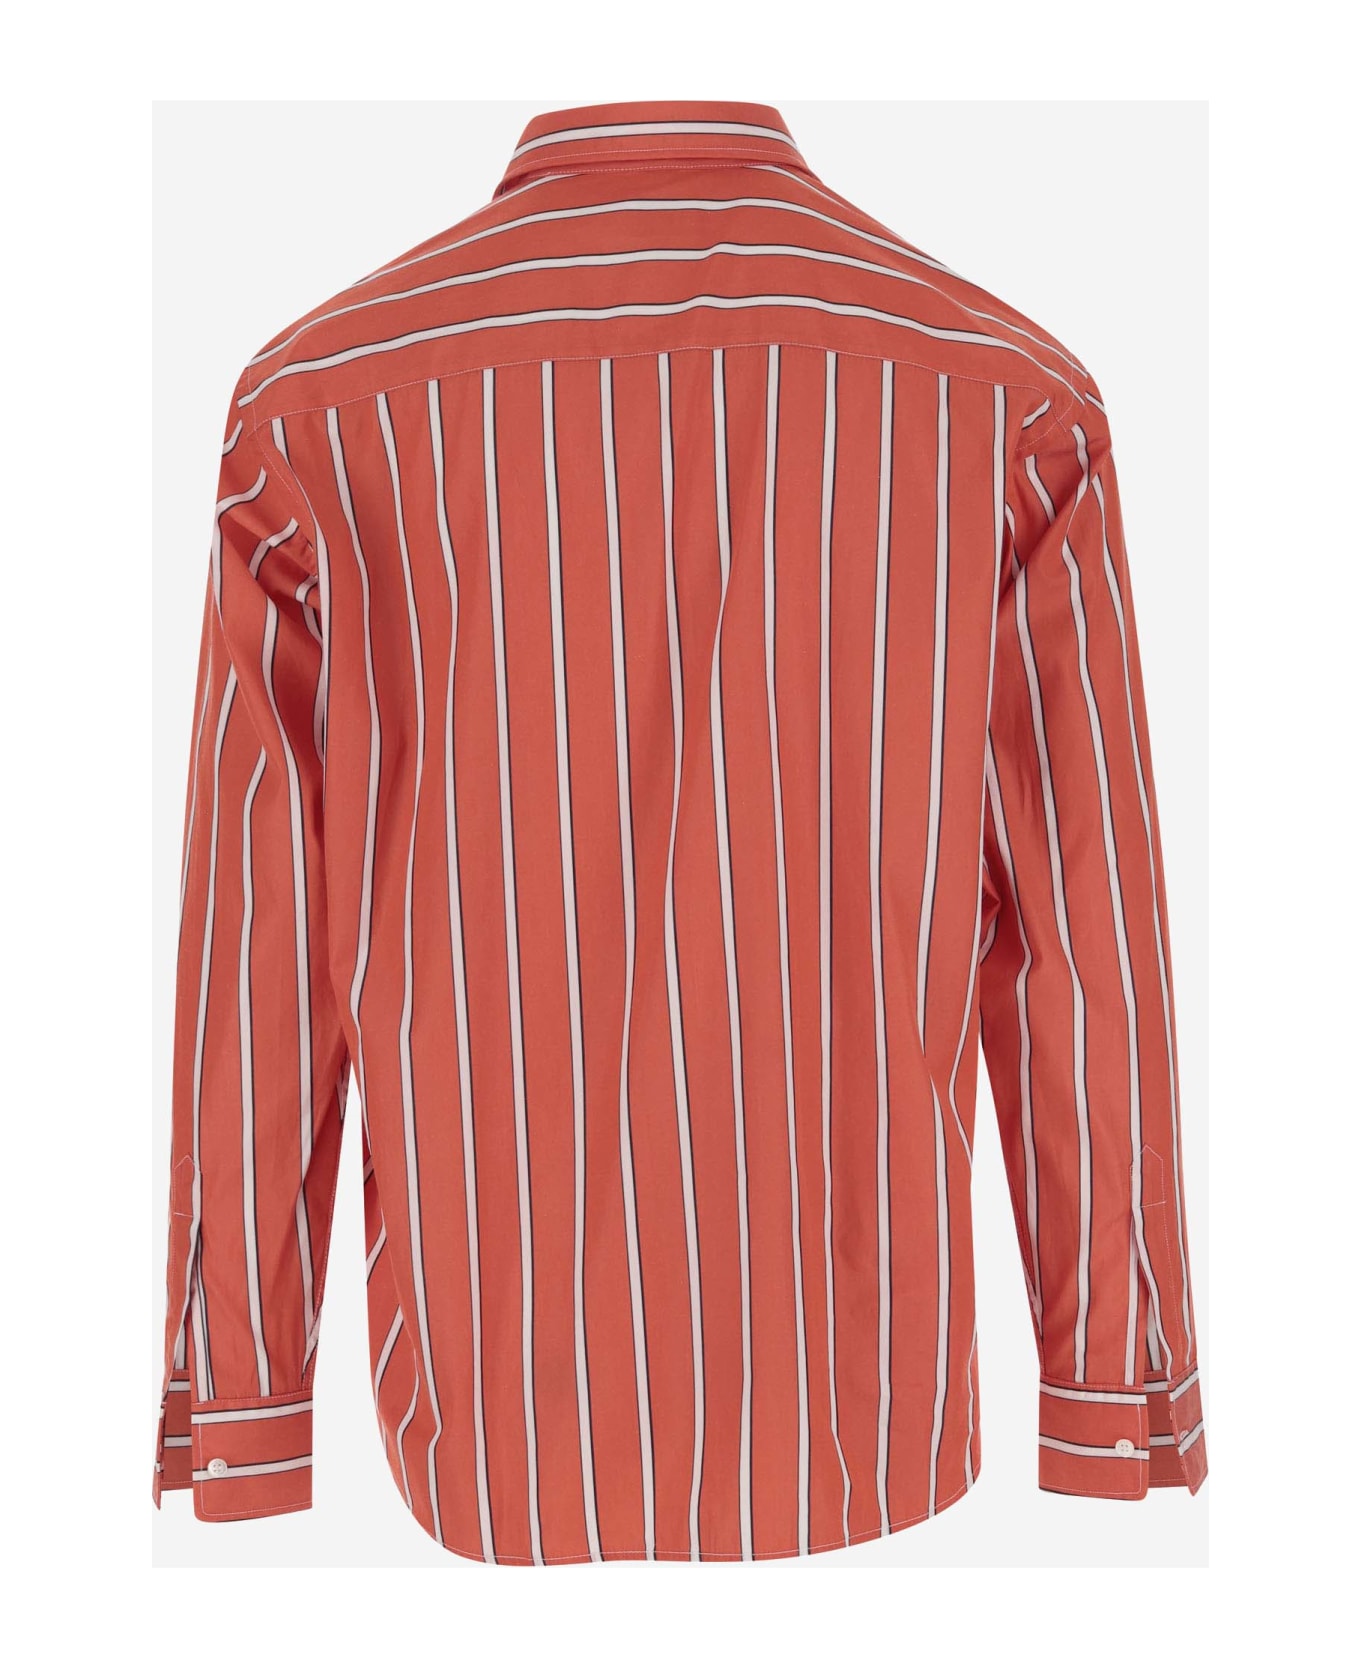 Aspesi Cotton Shirt With Striped Pattern - Red